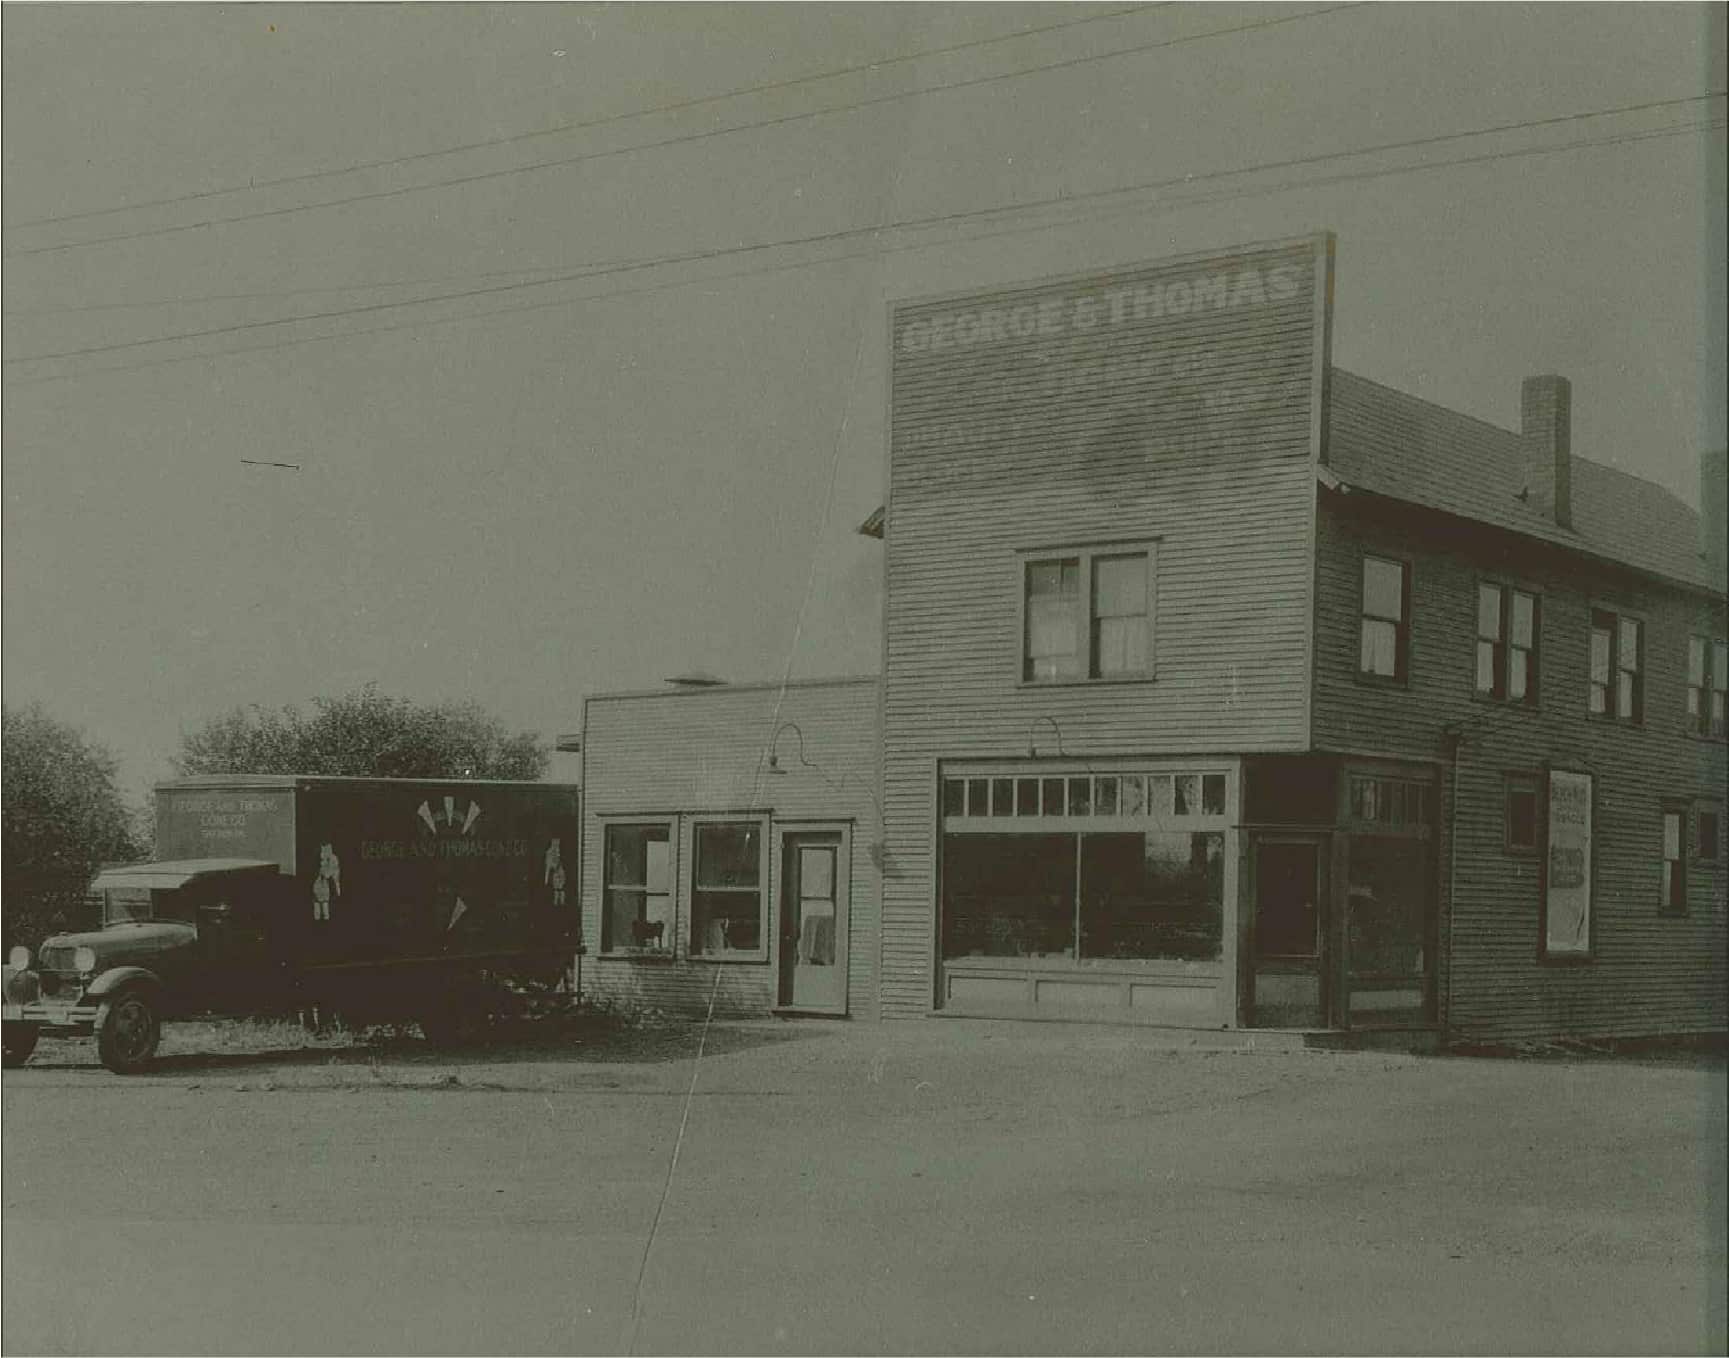 Plant is located at Corner of Ulp St. & Brookfield Ave., Brookfield, OH. from 1918-1934